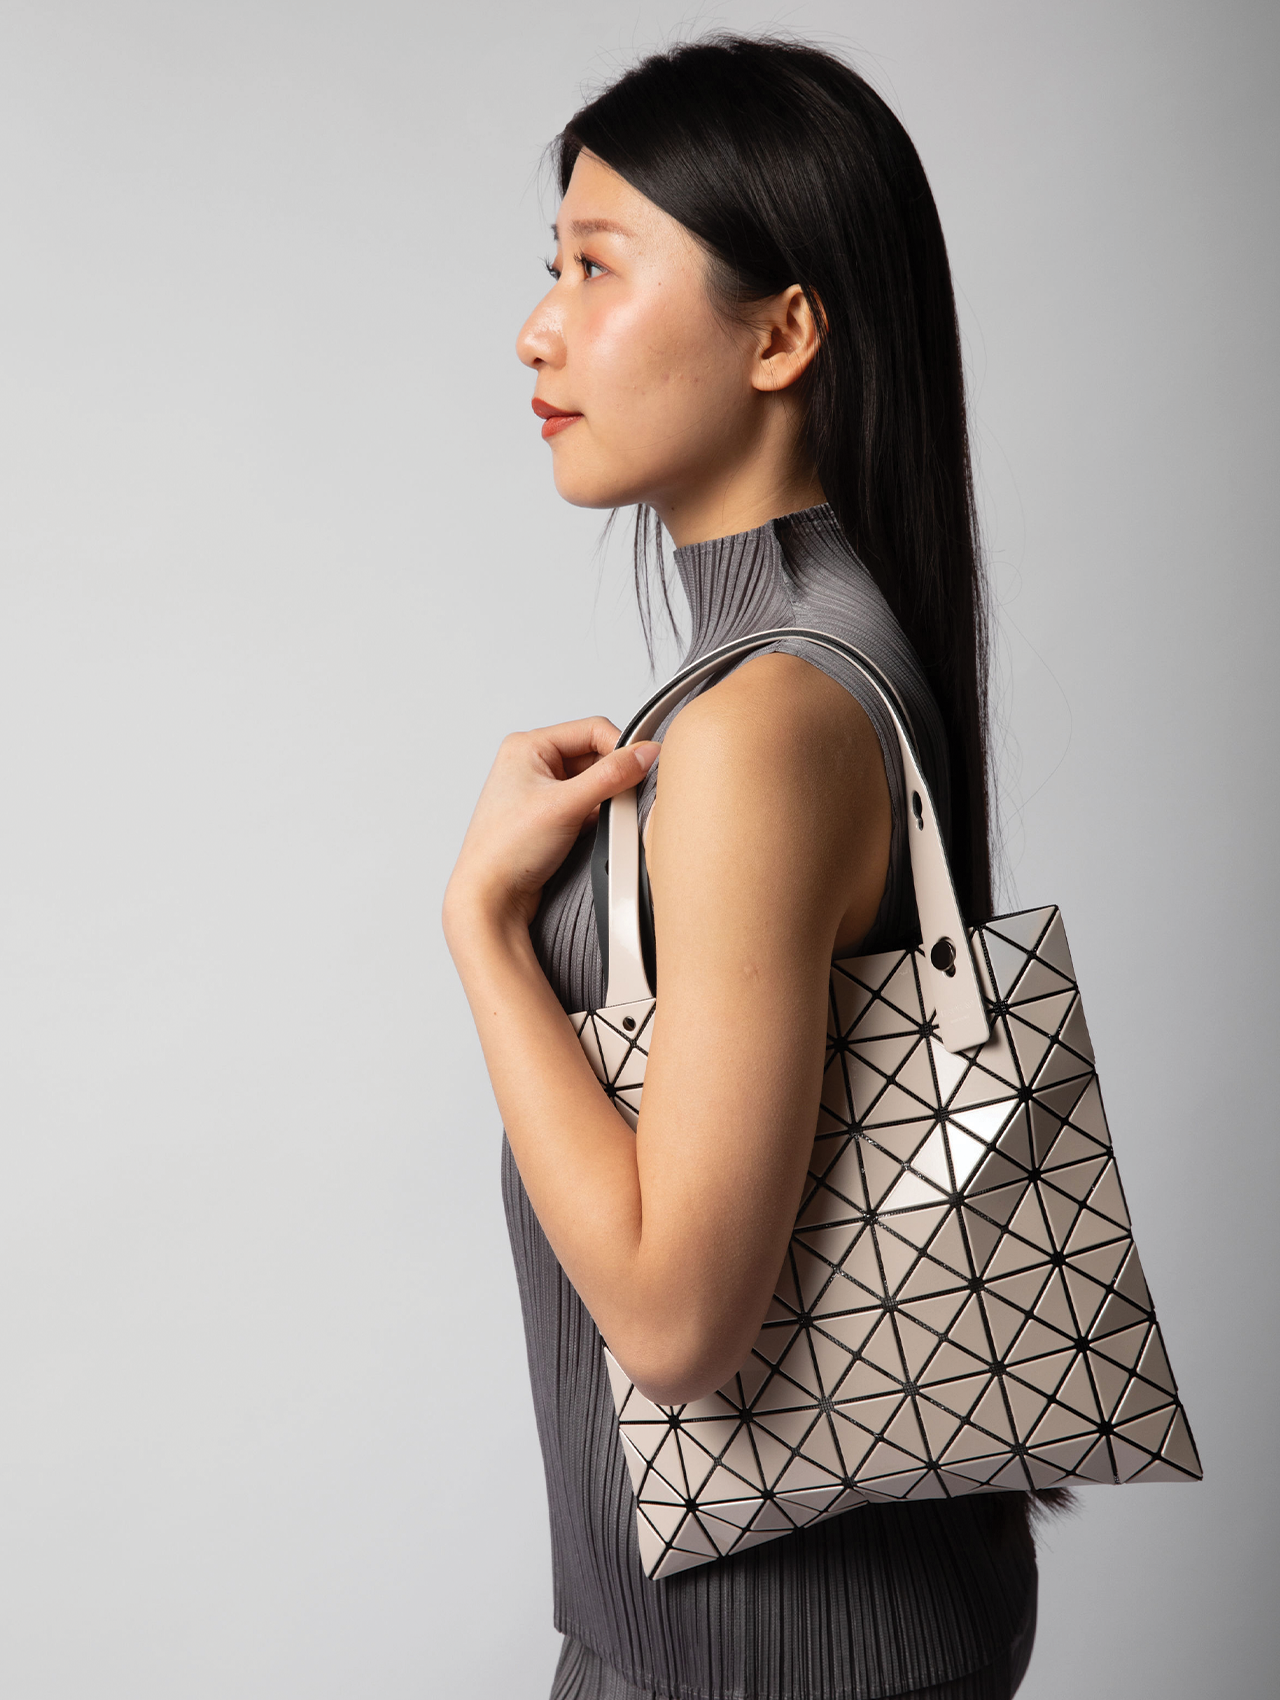 Buy Bao Bao Luminous crosbody bag for Women | Holographic reflective color  changing with detatchable chain Sling Bag | Medium size (assorted pattern)  at Amazon.in